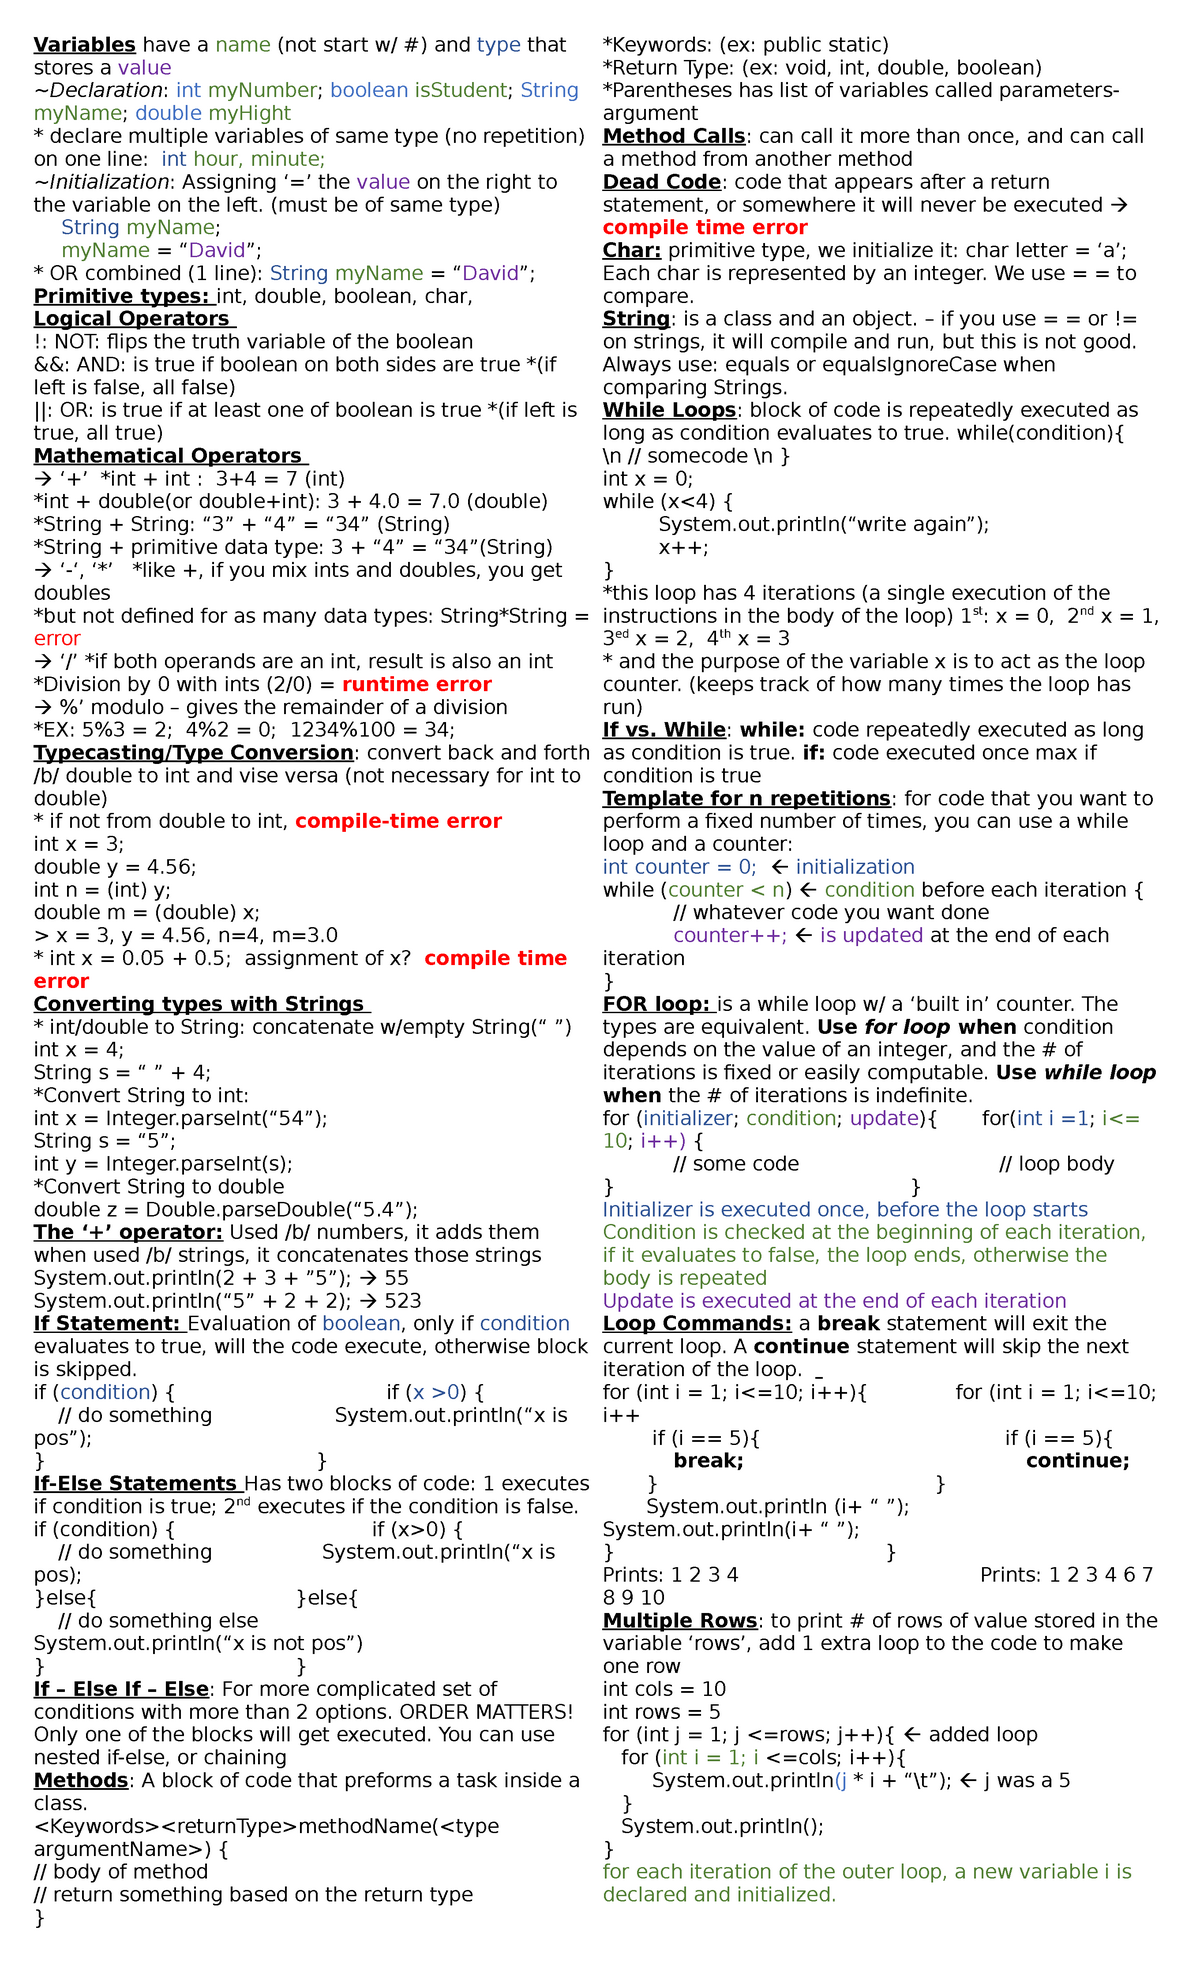 COMP 202 Final Exam Cheat Sheet Variables have a name (not start w